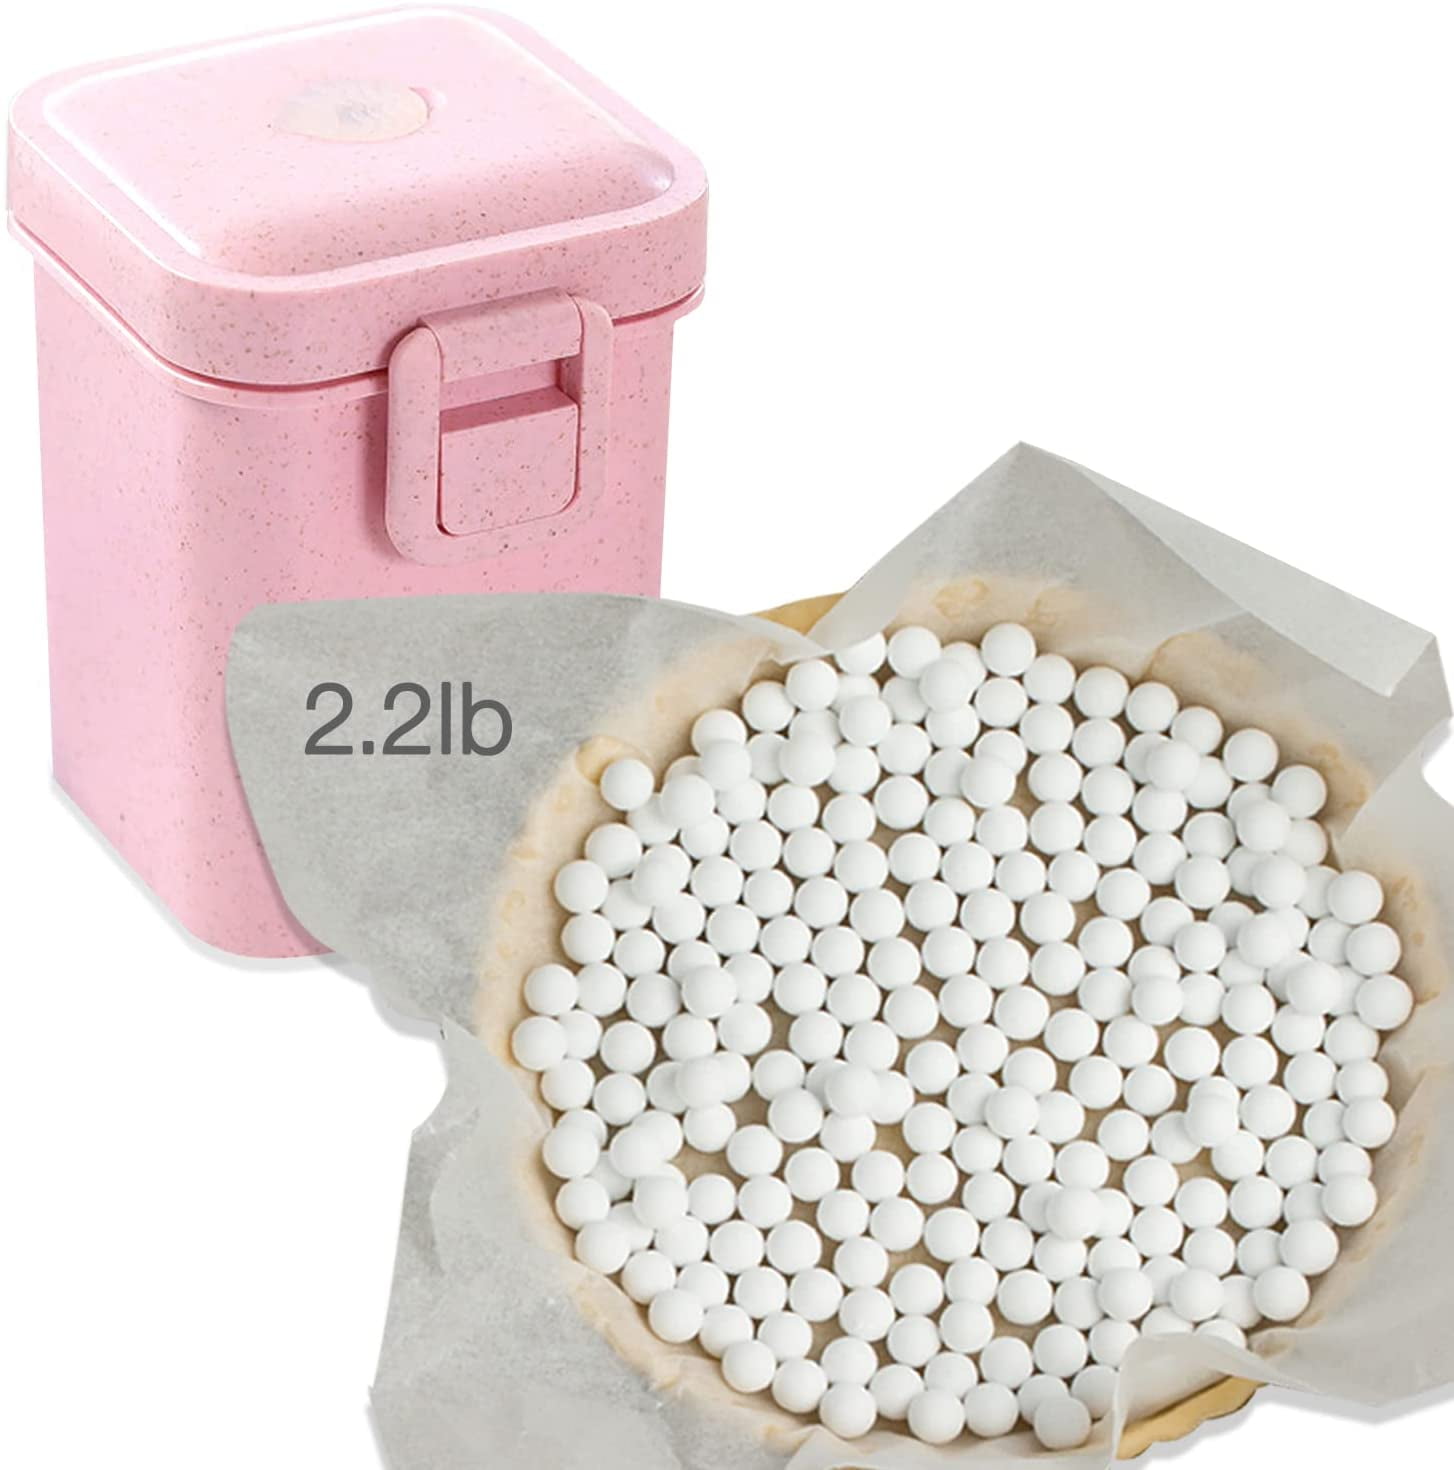 Pink 35 Oz Total 2.2Lb Ceramic Pie Weights Baking Beans Pie Crust Reusable 10mm Weights Natural Ceramic Stoneware with Wheat Straw Container 